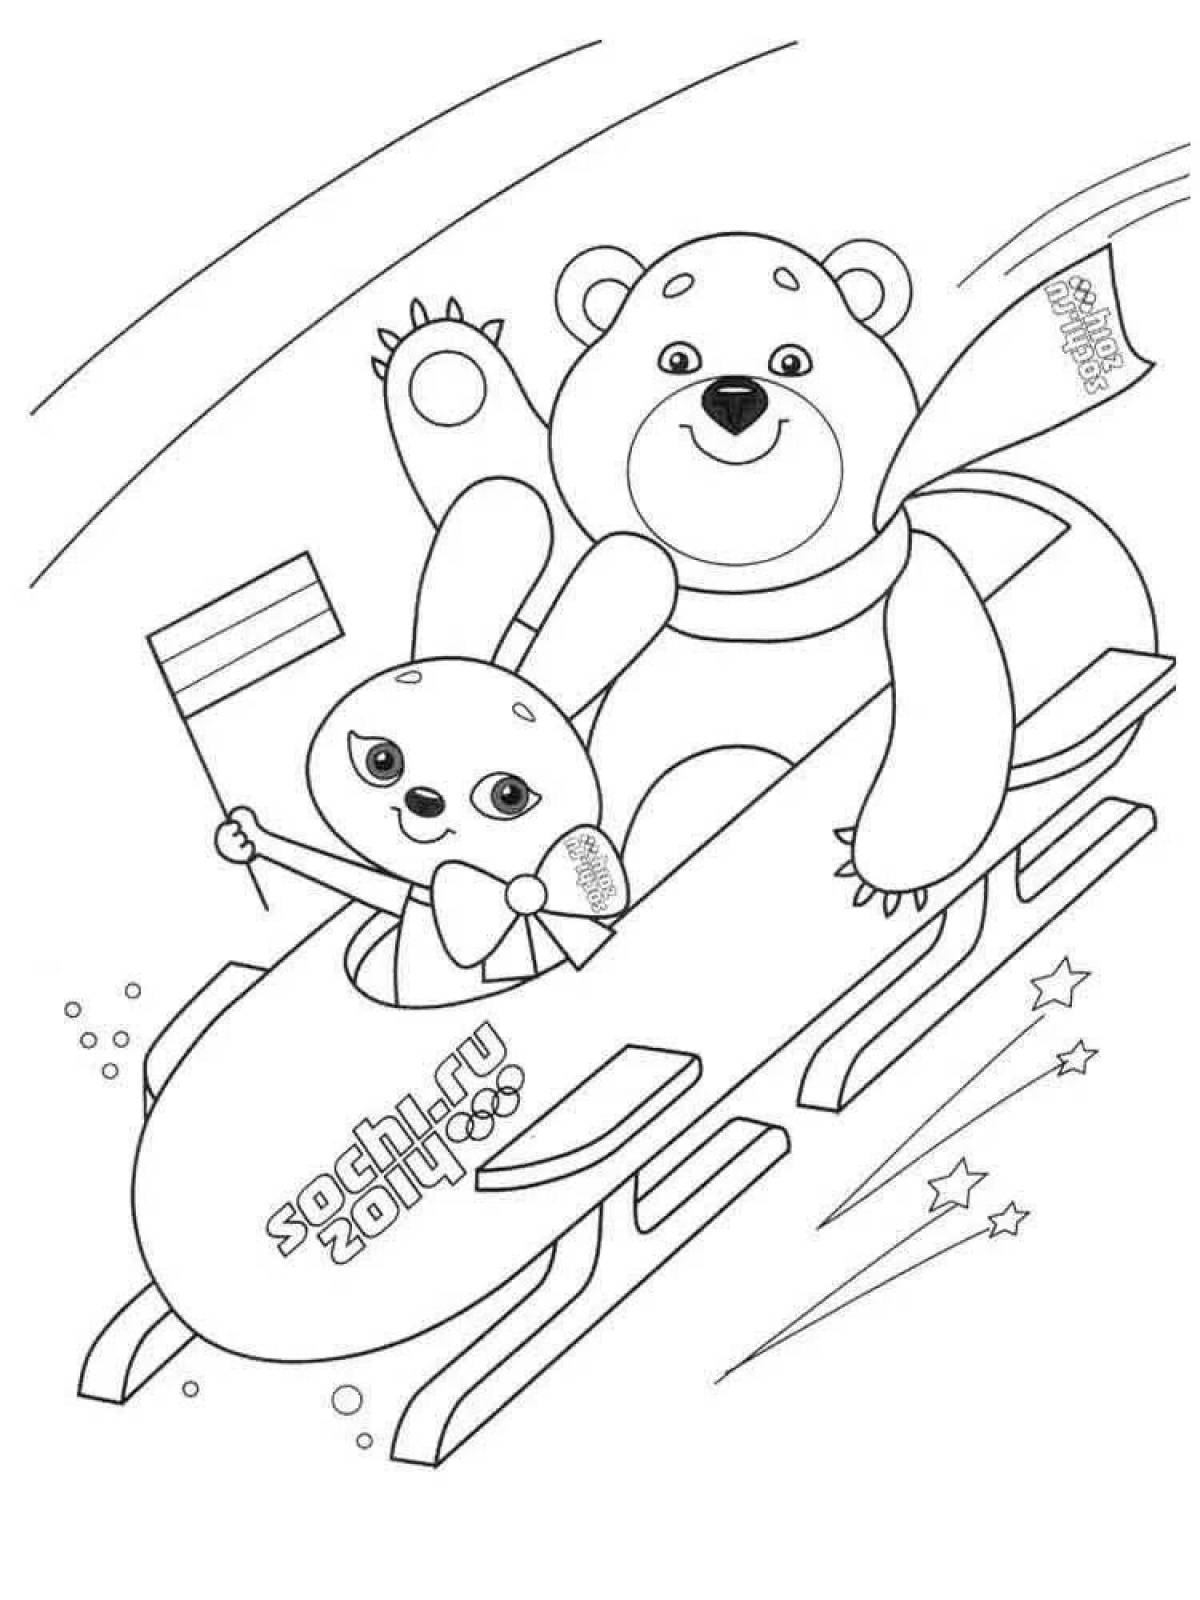 Coloring page glamorous olympic winter sports